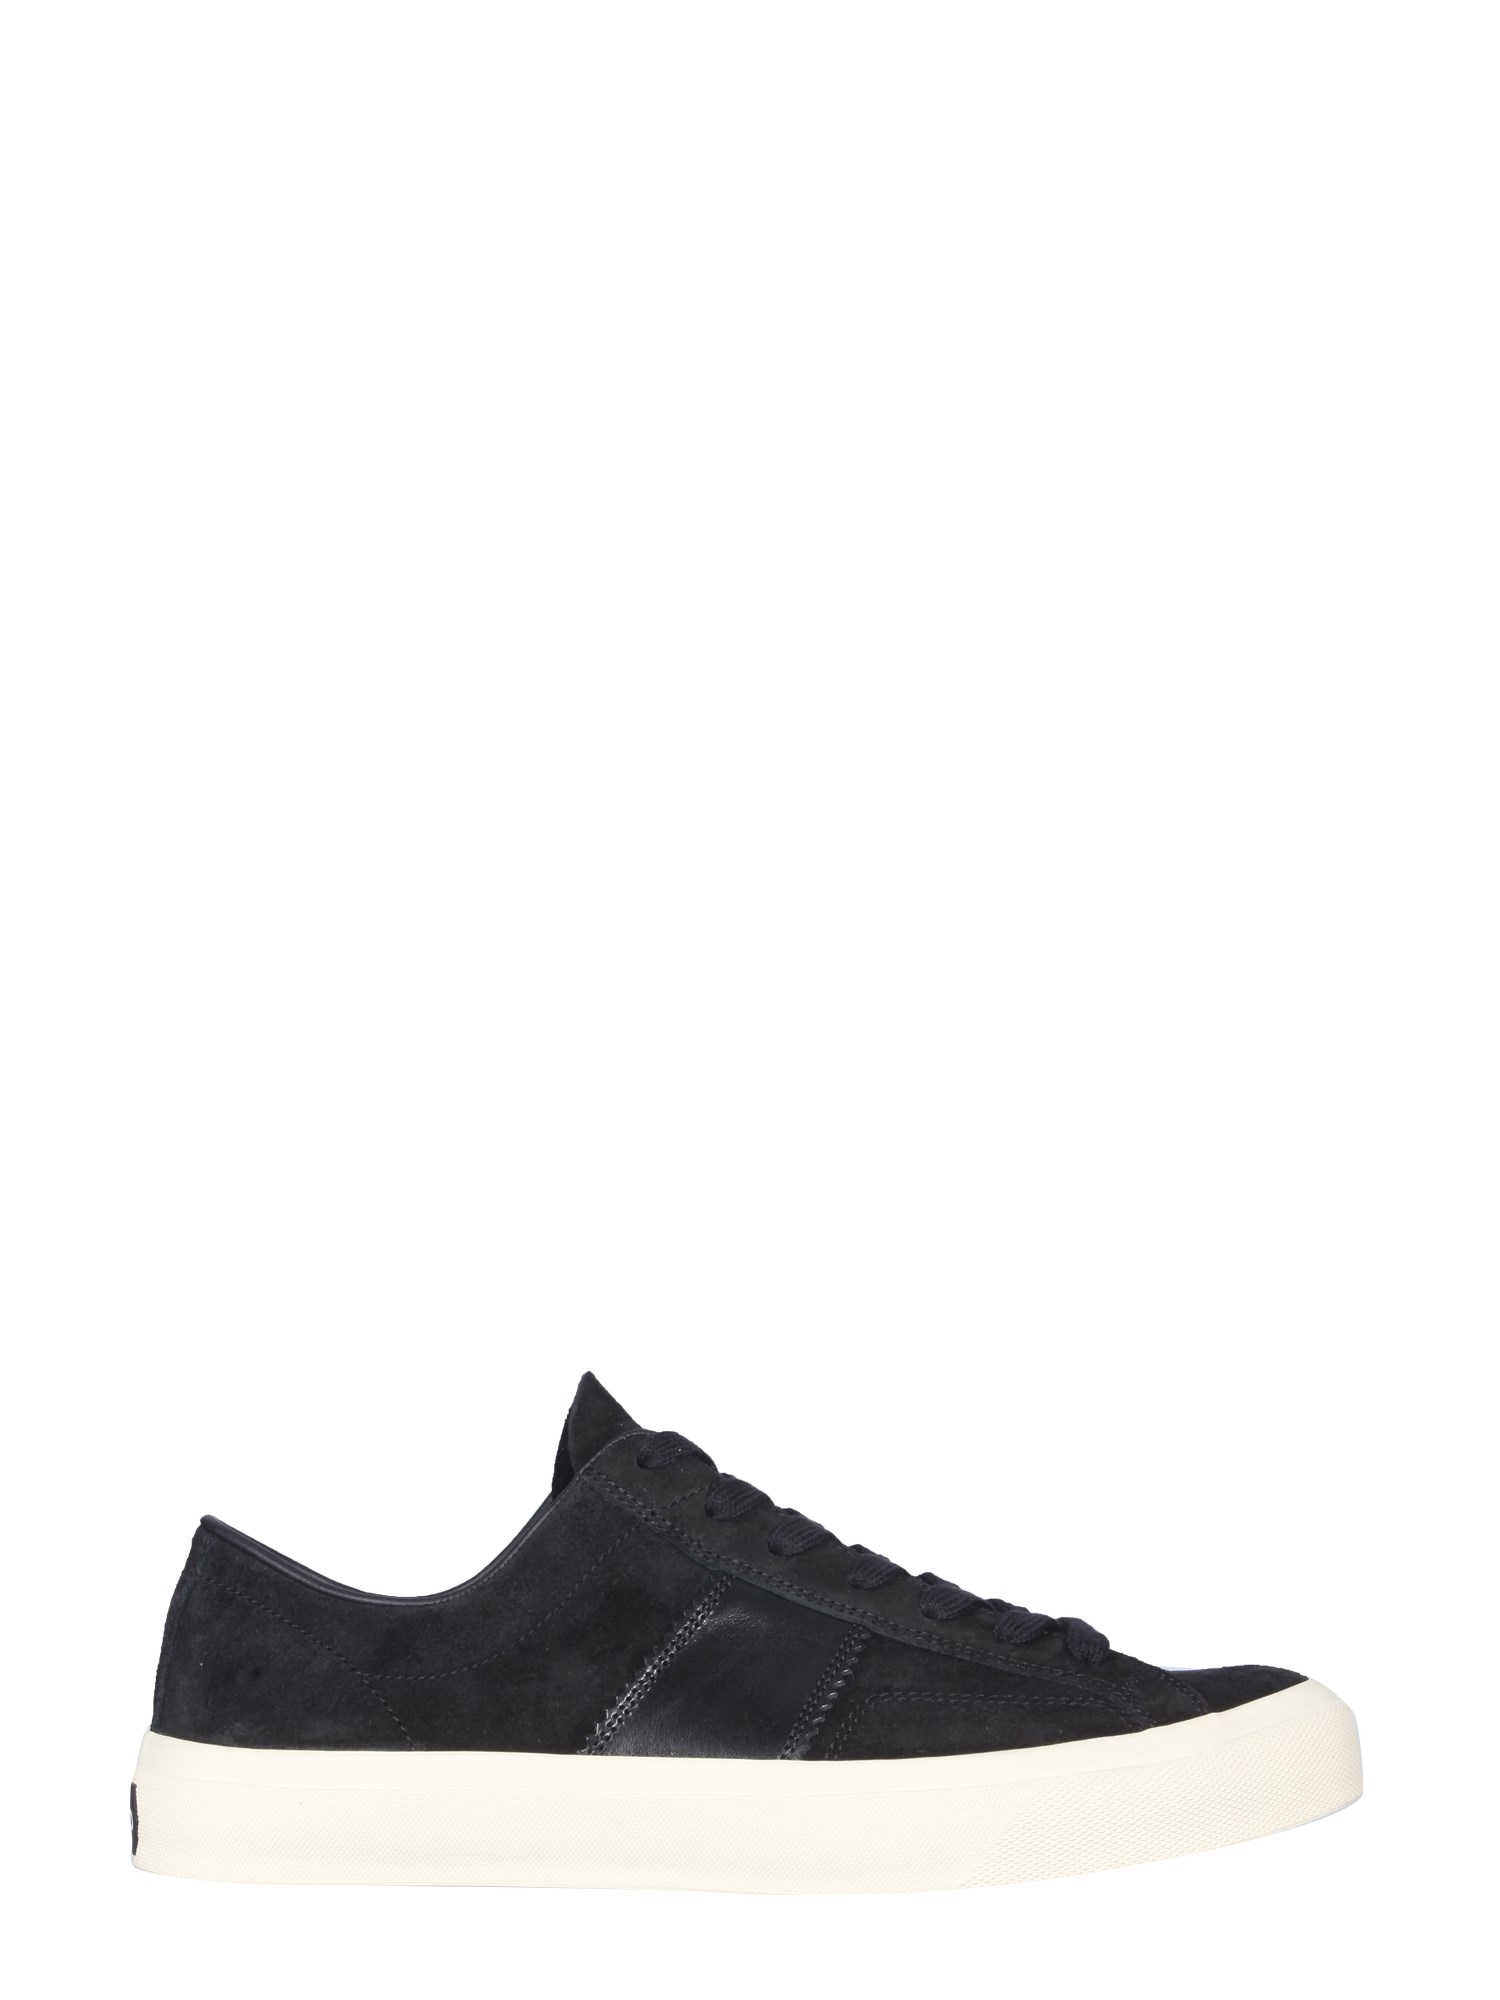 TOM FORD SUEDE SNEAKER